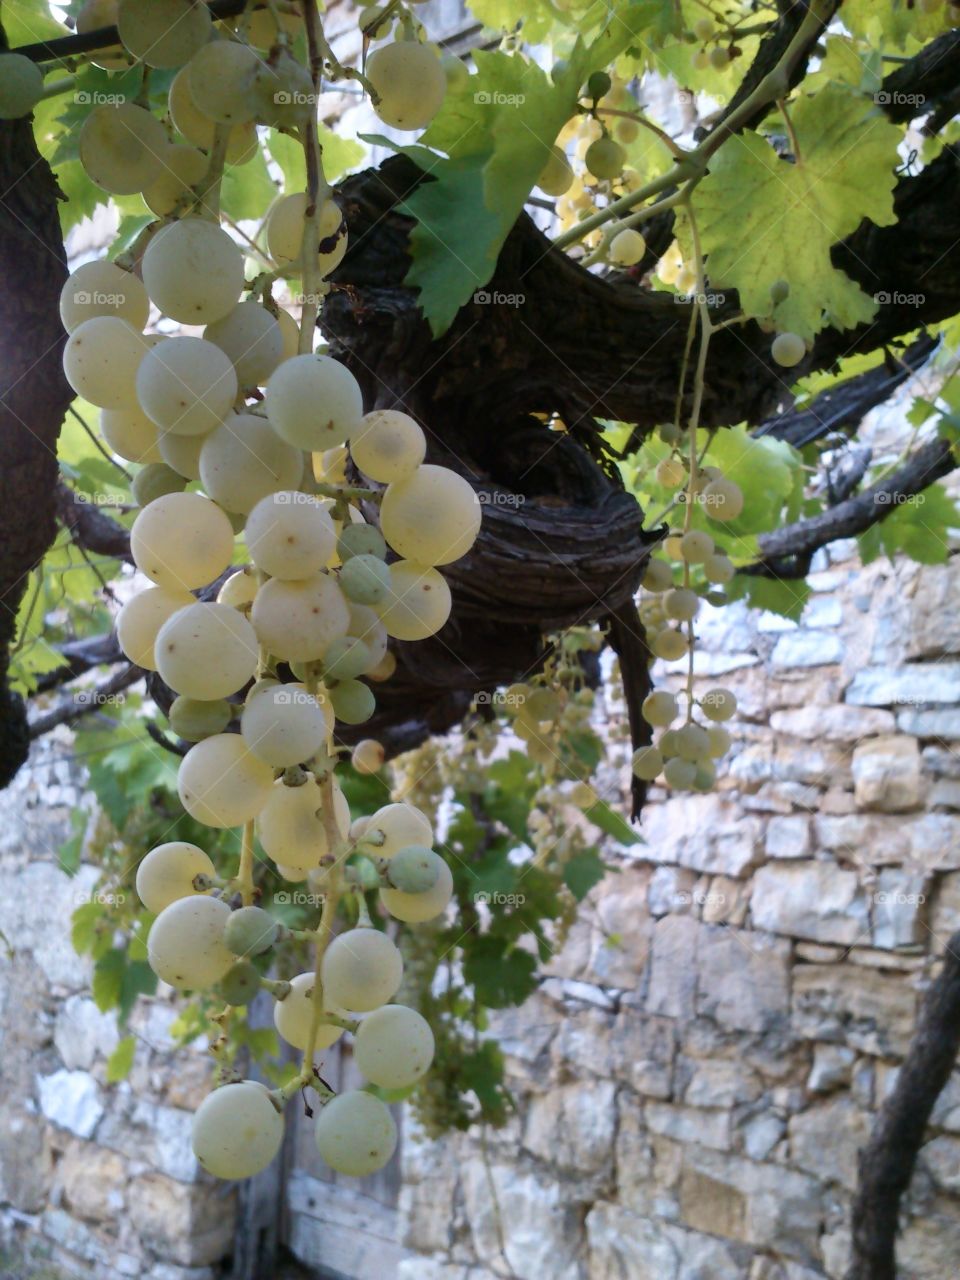 grapes. taken at the place where time stops :)